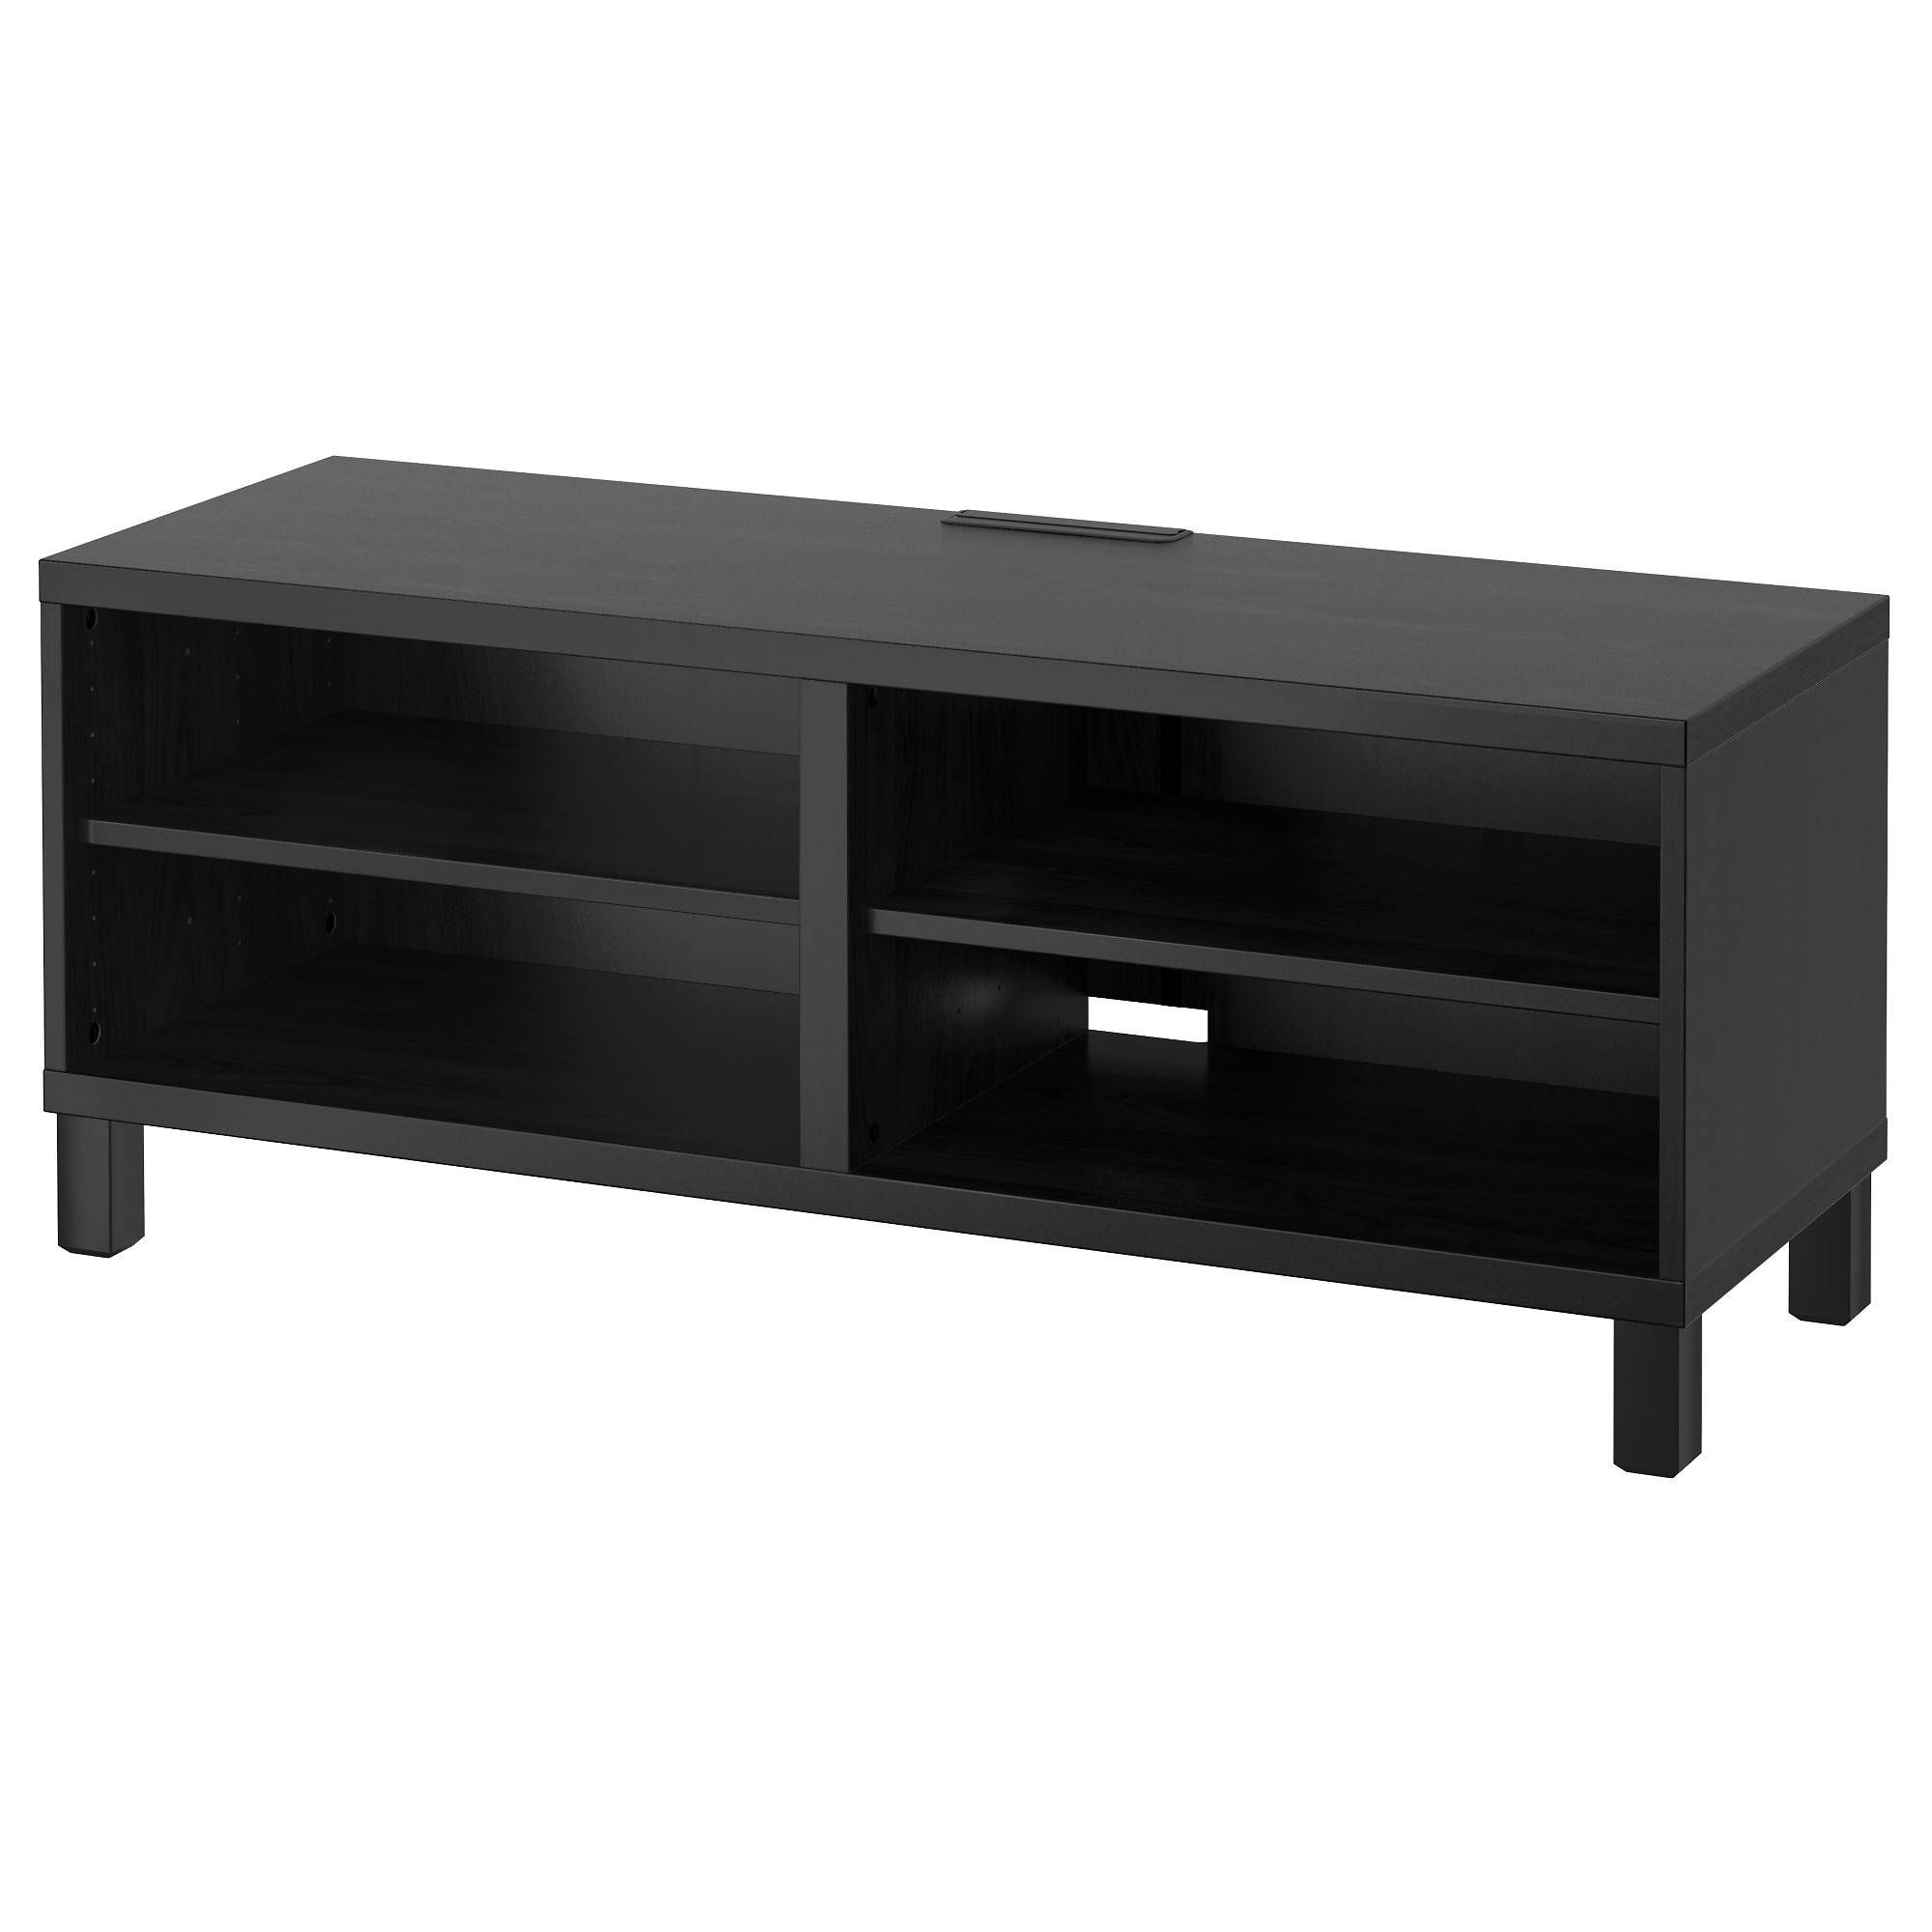 Tv Stands & Entertainment Centers – Ikea With Regard To Tv Unit And Coffee Table Sets (View 20 of 30)